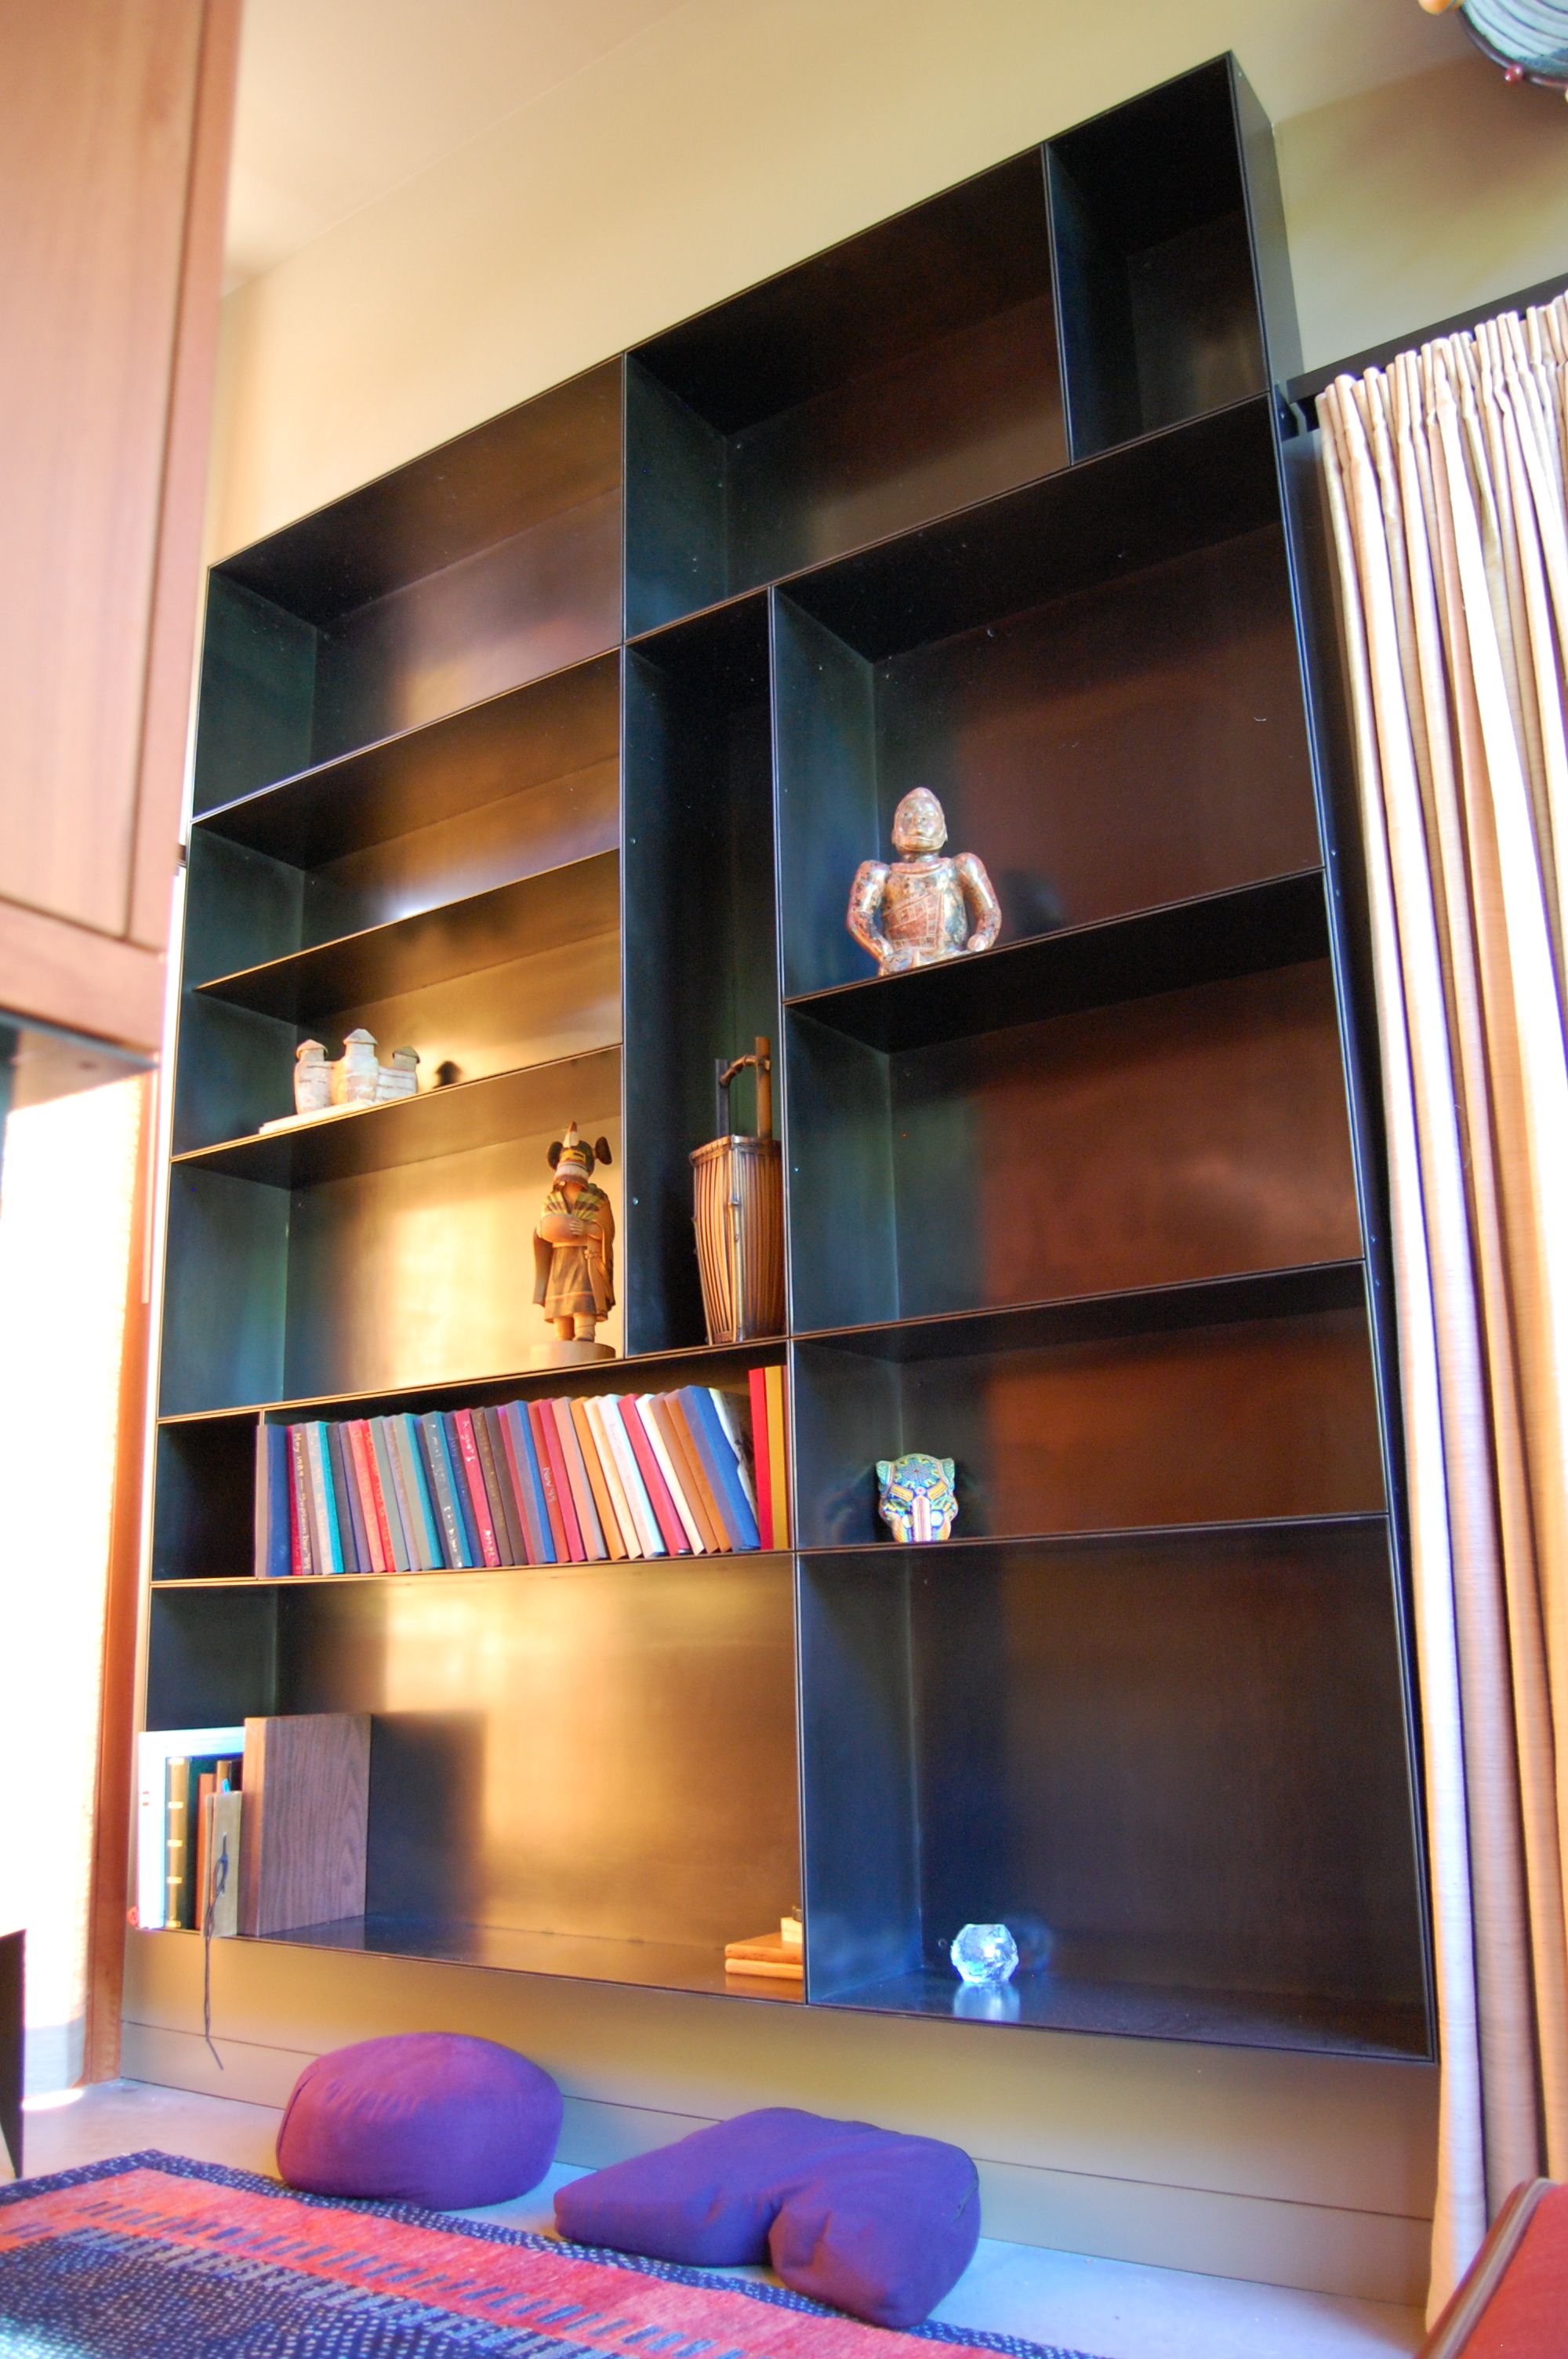  Built in book shelves. Each shelf is an individual hot rolled steel box.  Designed by Eggleston/Farkas Architects 